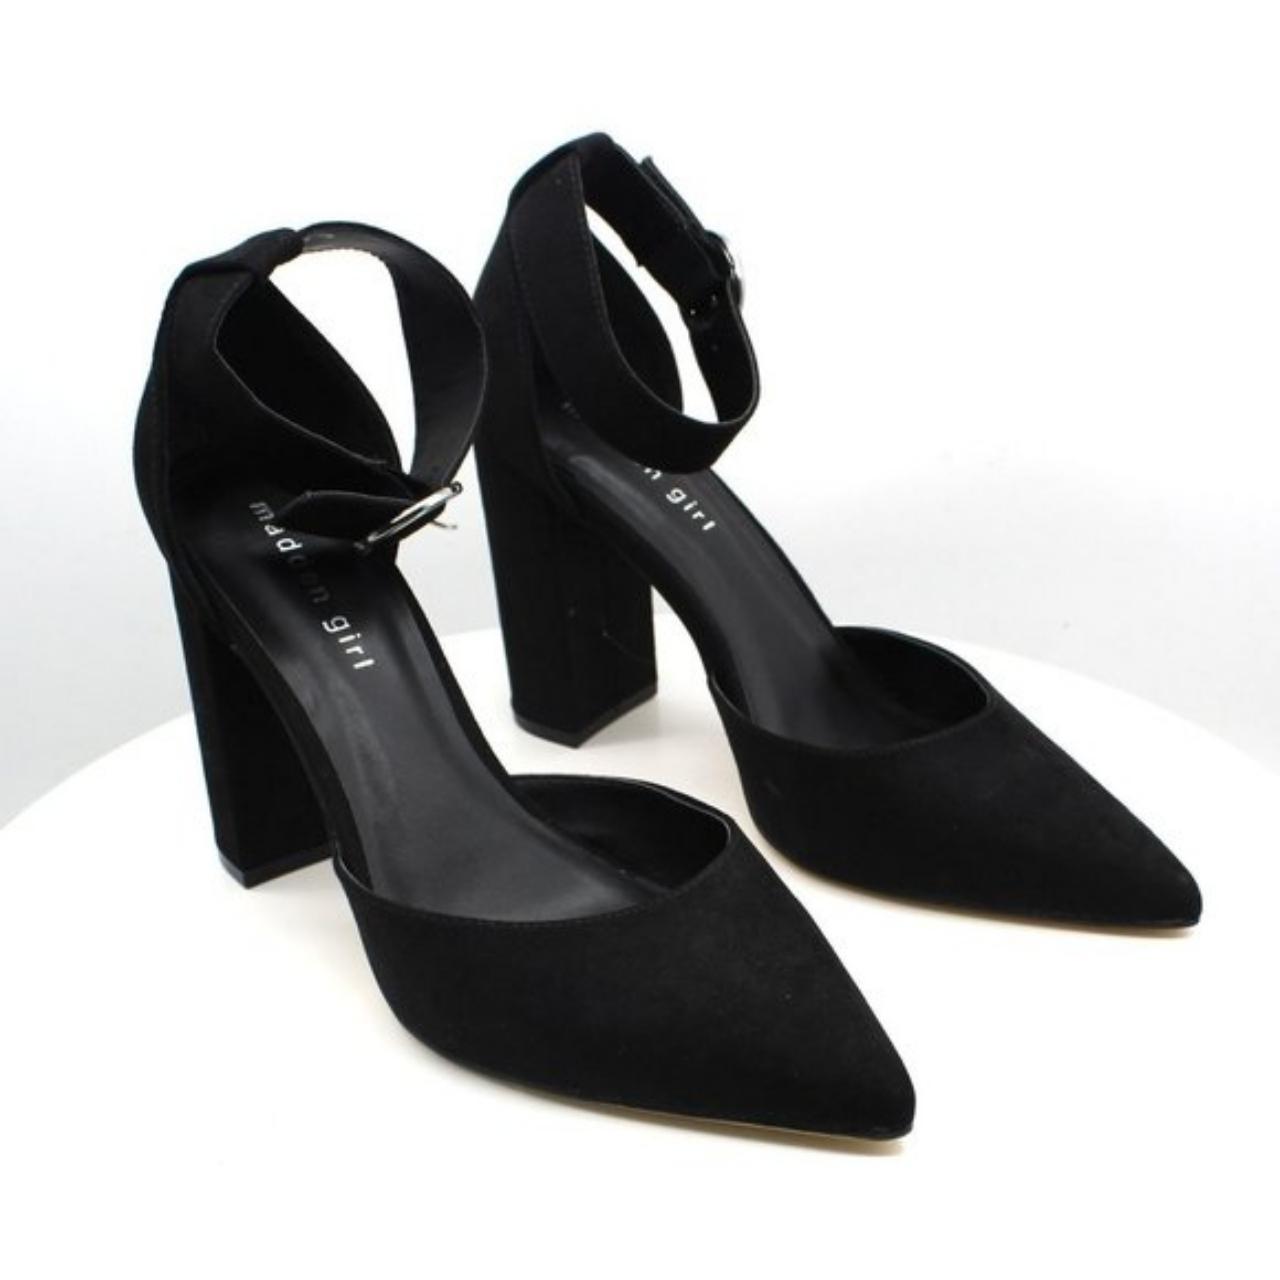 Product Image 1 - Madden Girl Saxon Two-Piece Pumps

A